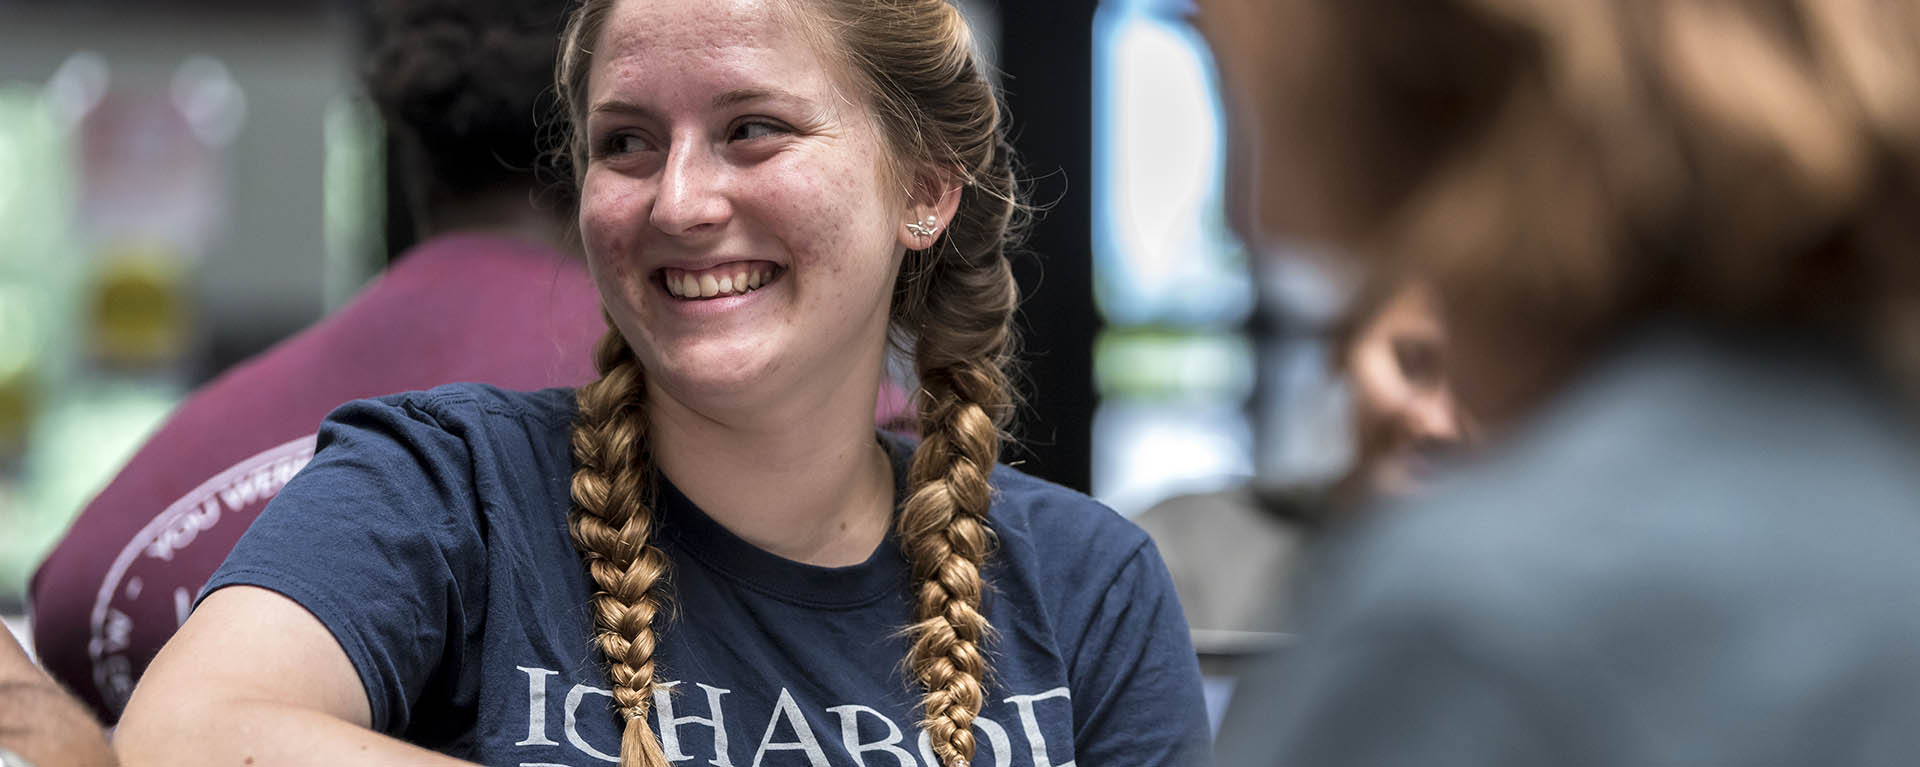 A student smiles while wearing a Washburn shirt